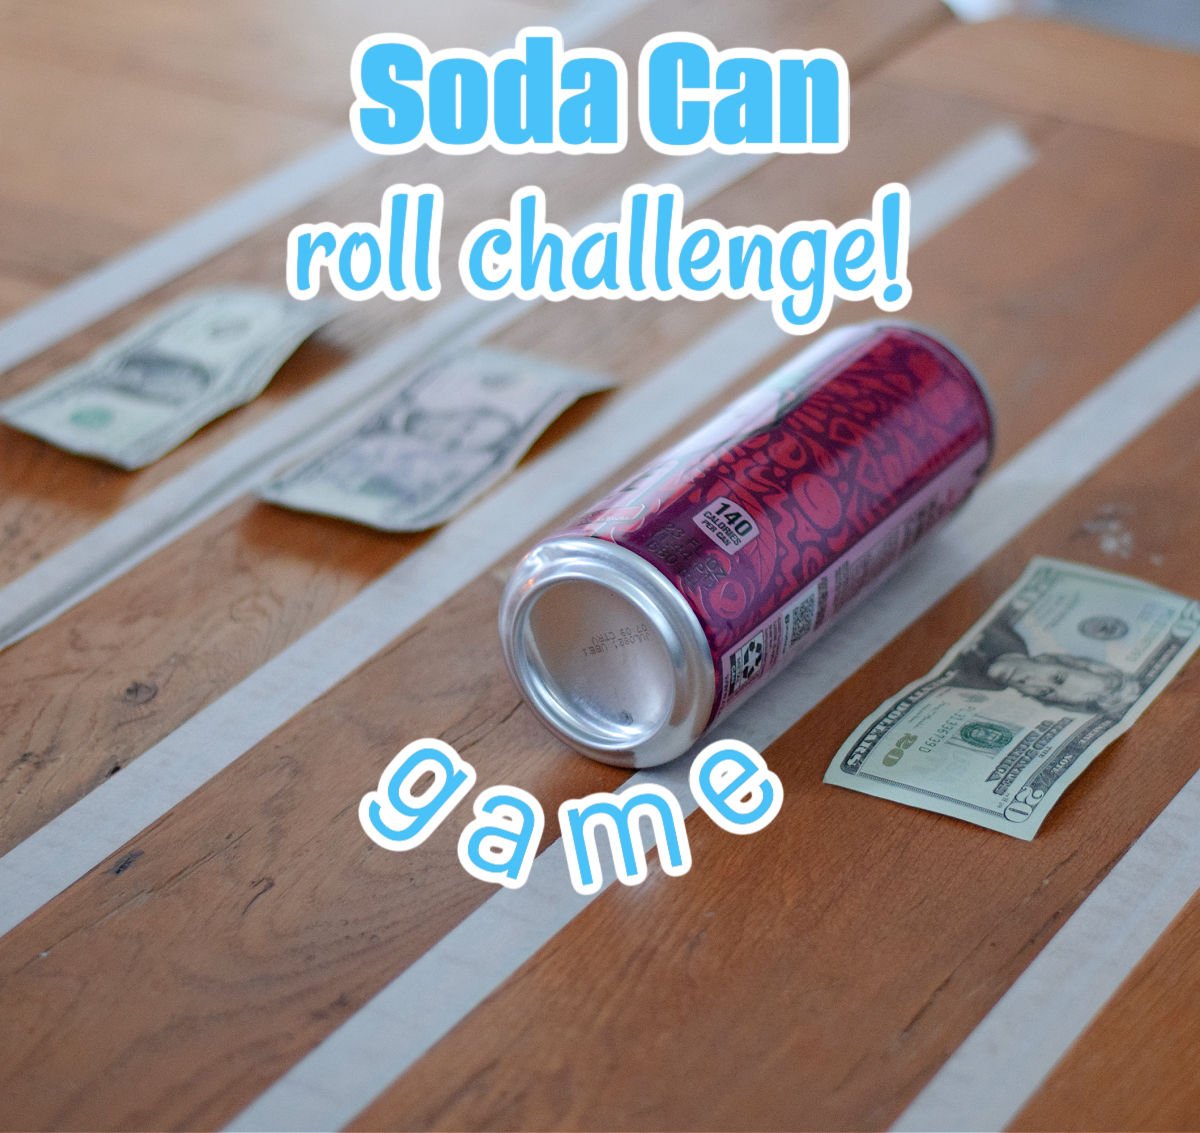 soda can roll challenge game